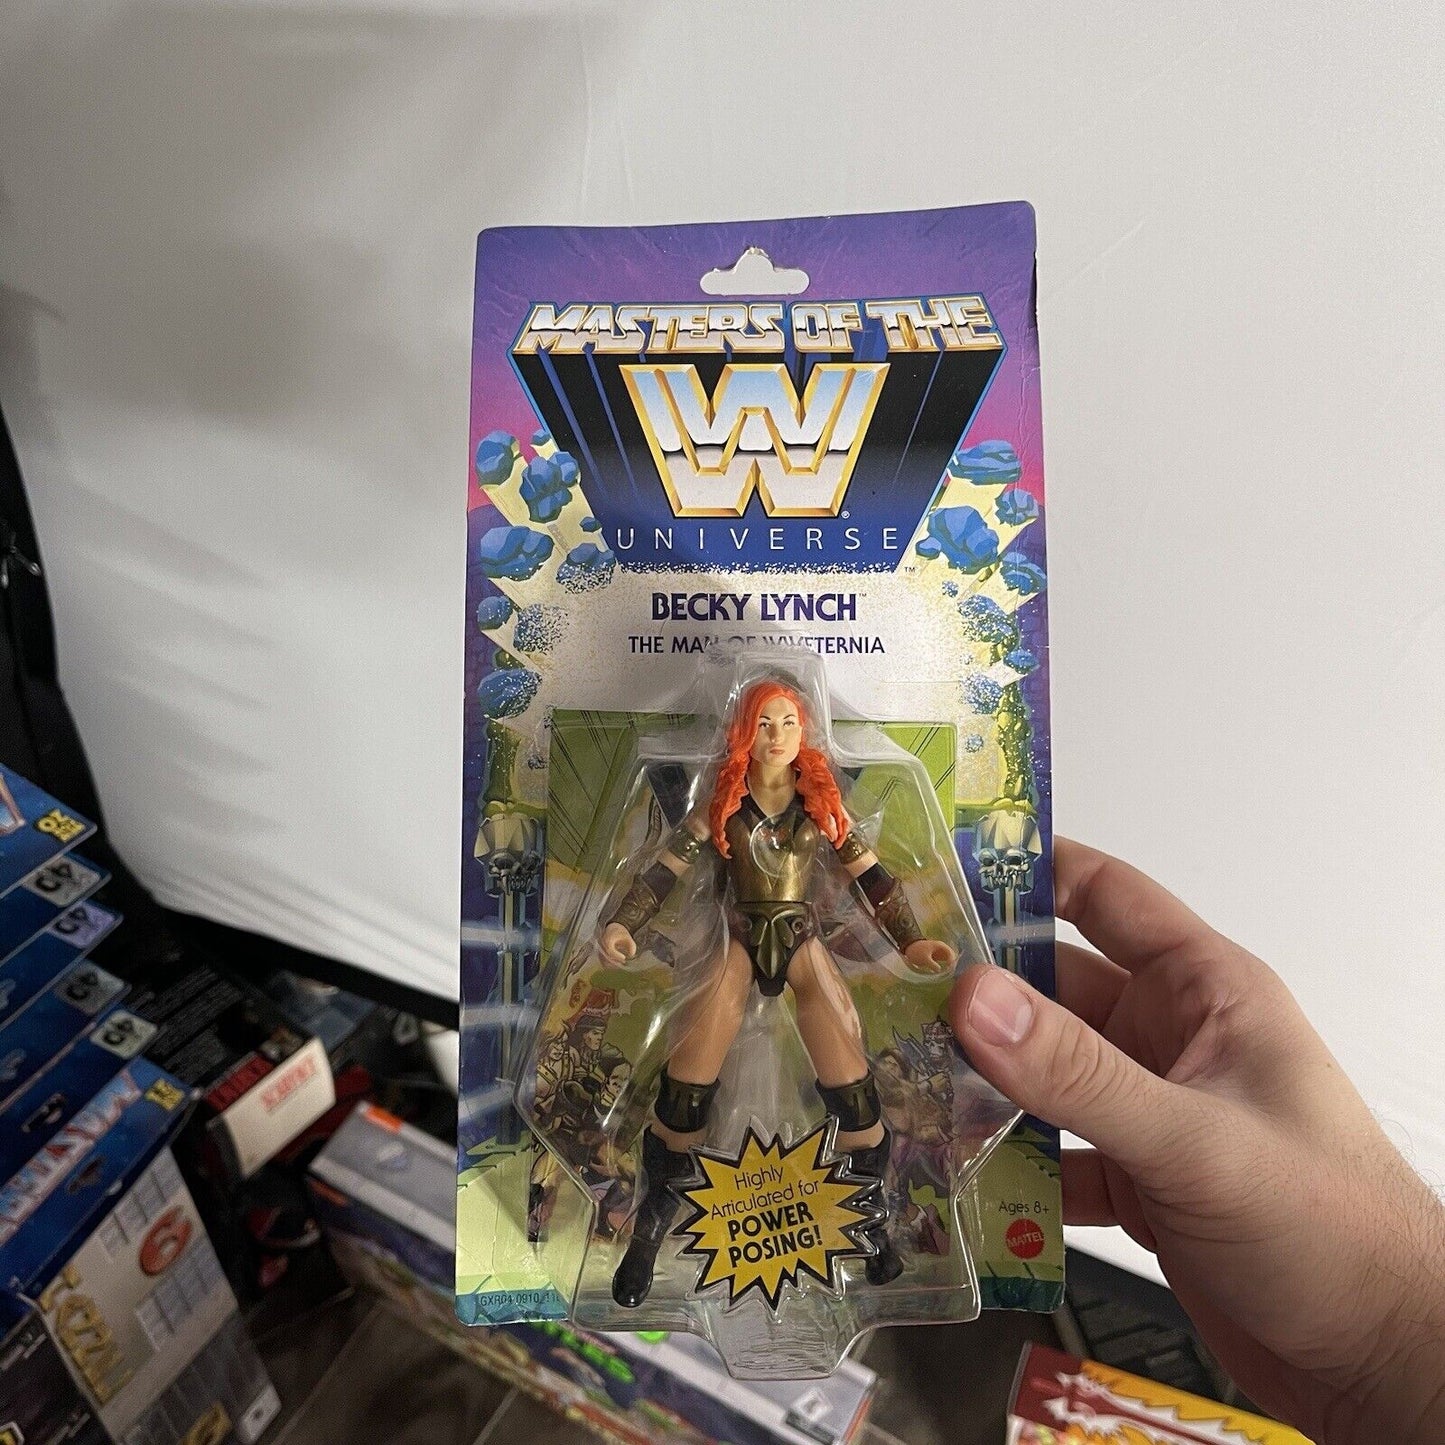 2020 Mattel Masters of The WWE Universe Wave 5 Becky Lynch 5" Action Figure